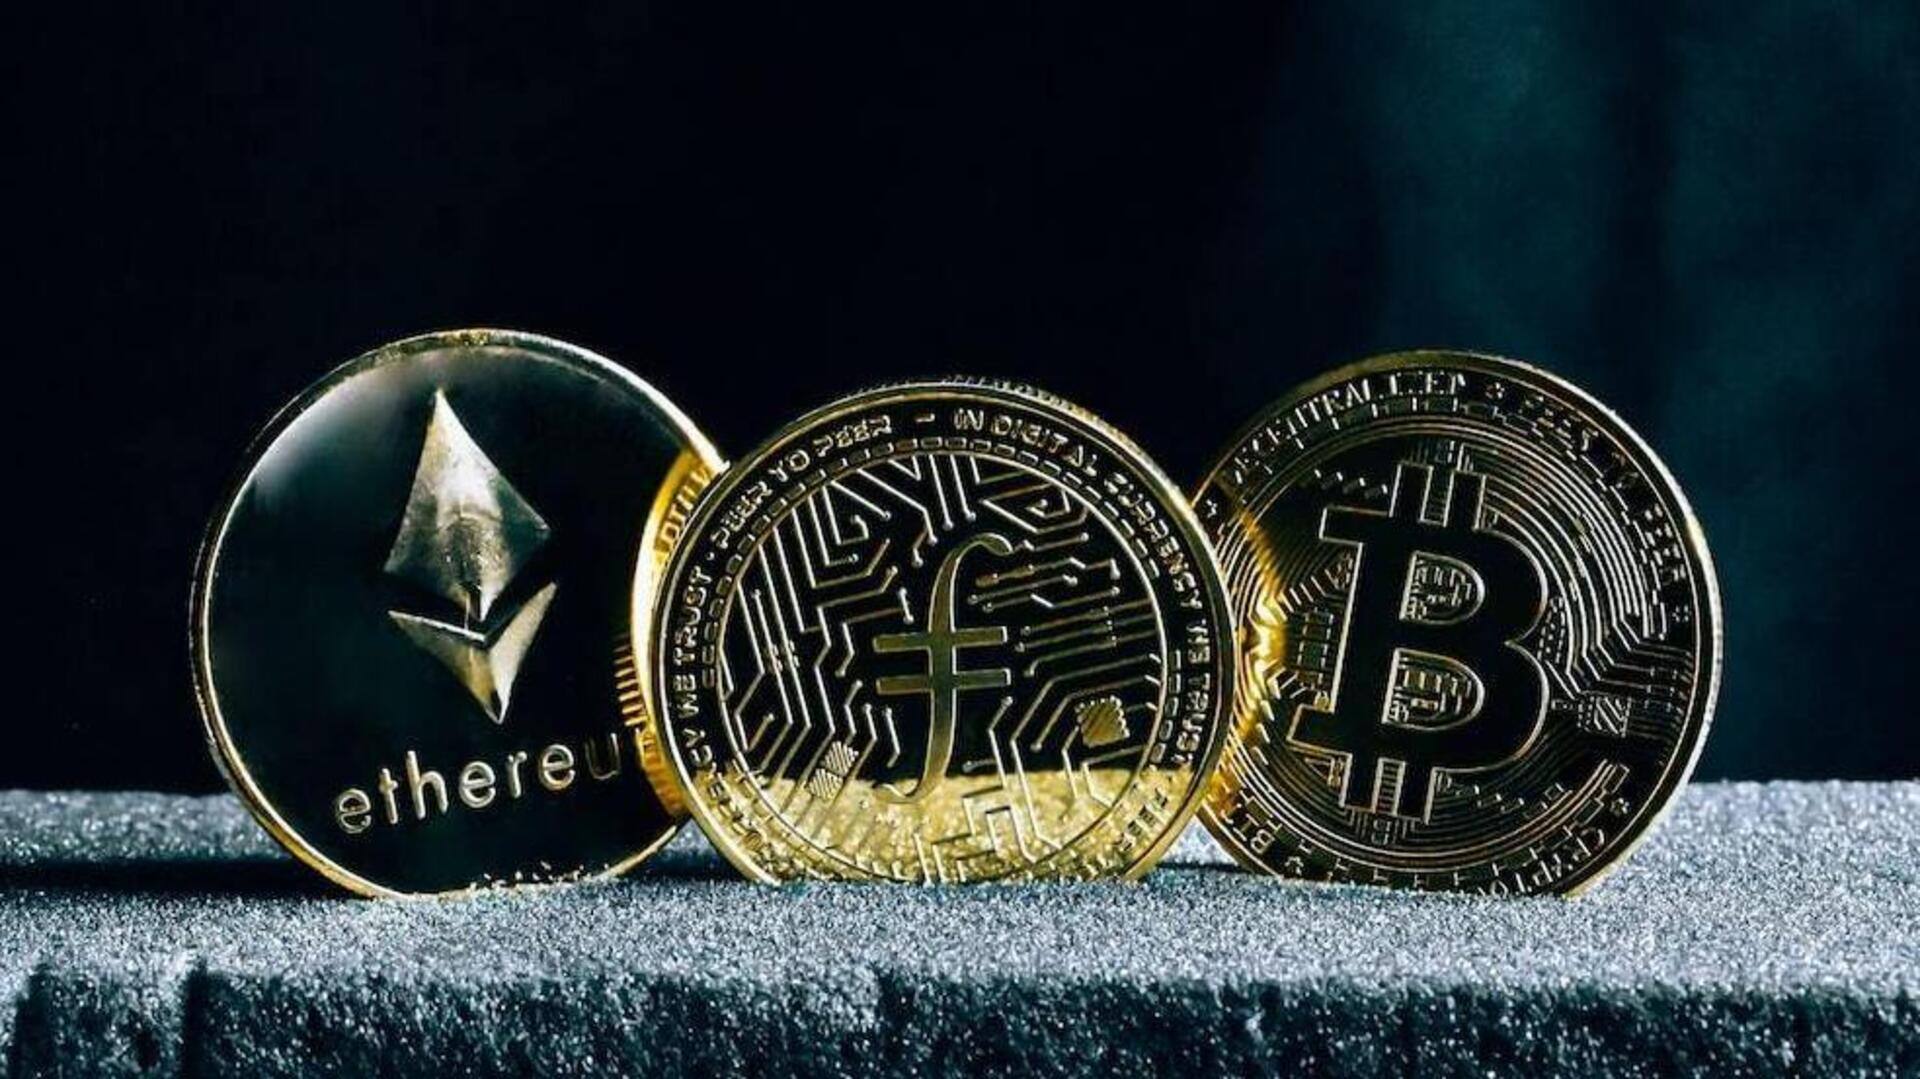 Today's cryptocurrency prices: Check rates of Bitcoin, Ethereum, BNB, Tether